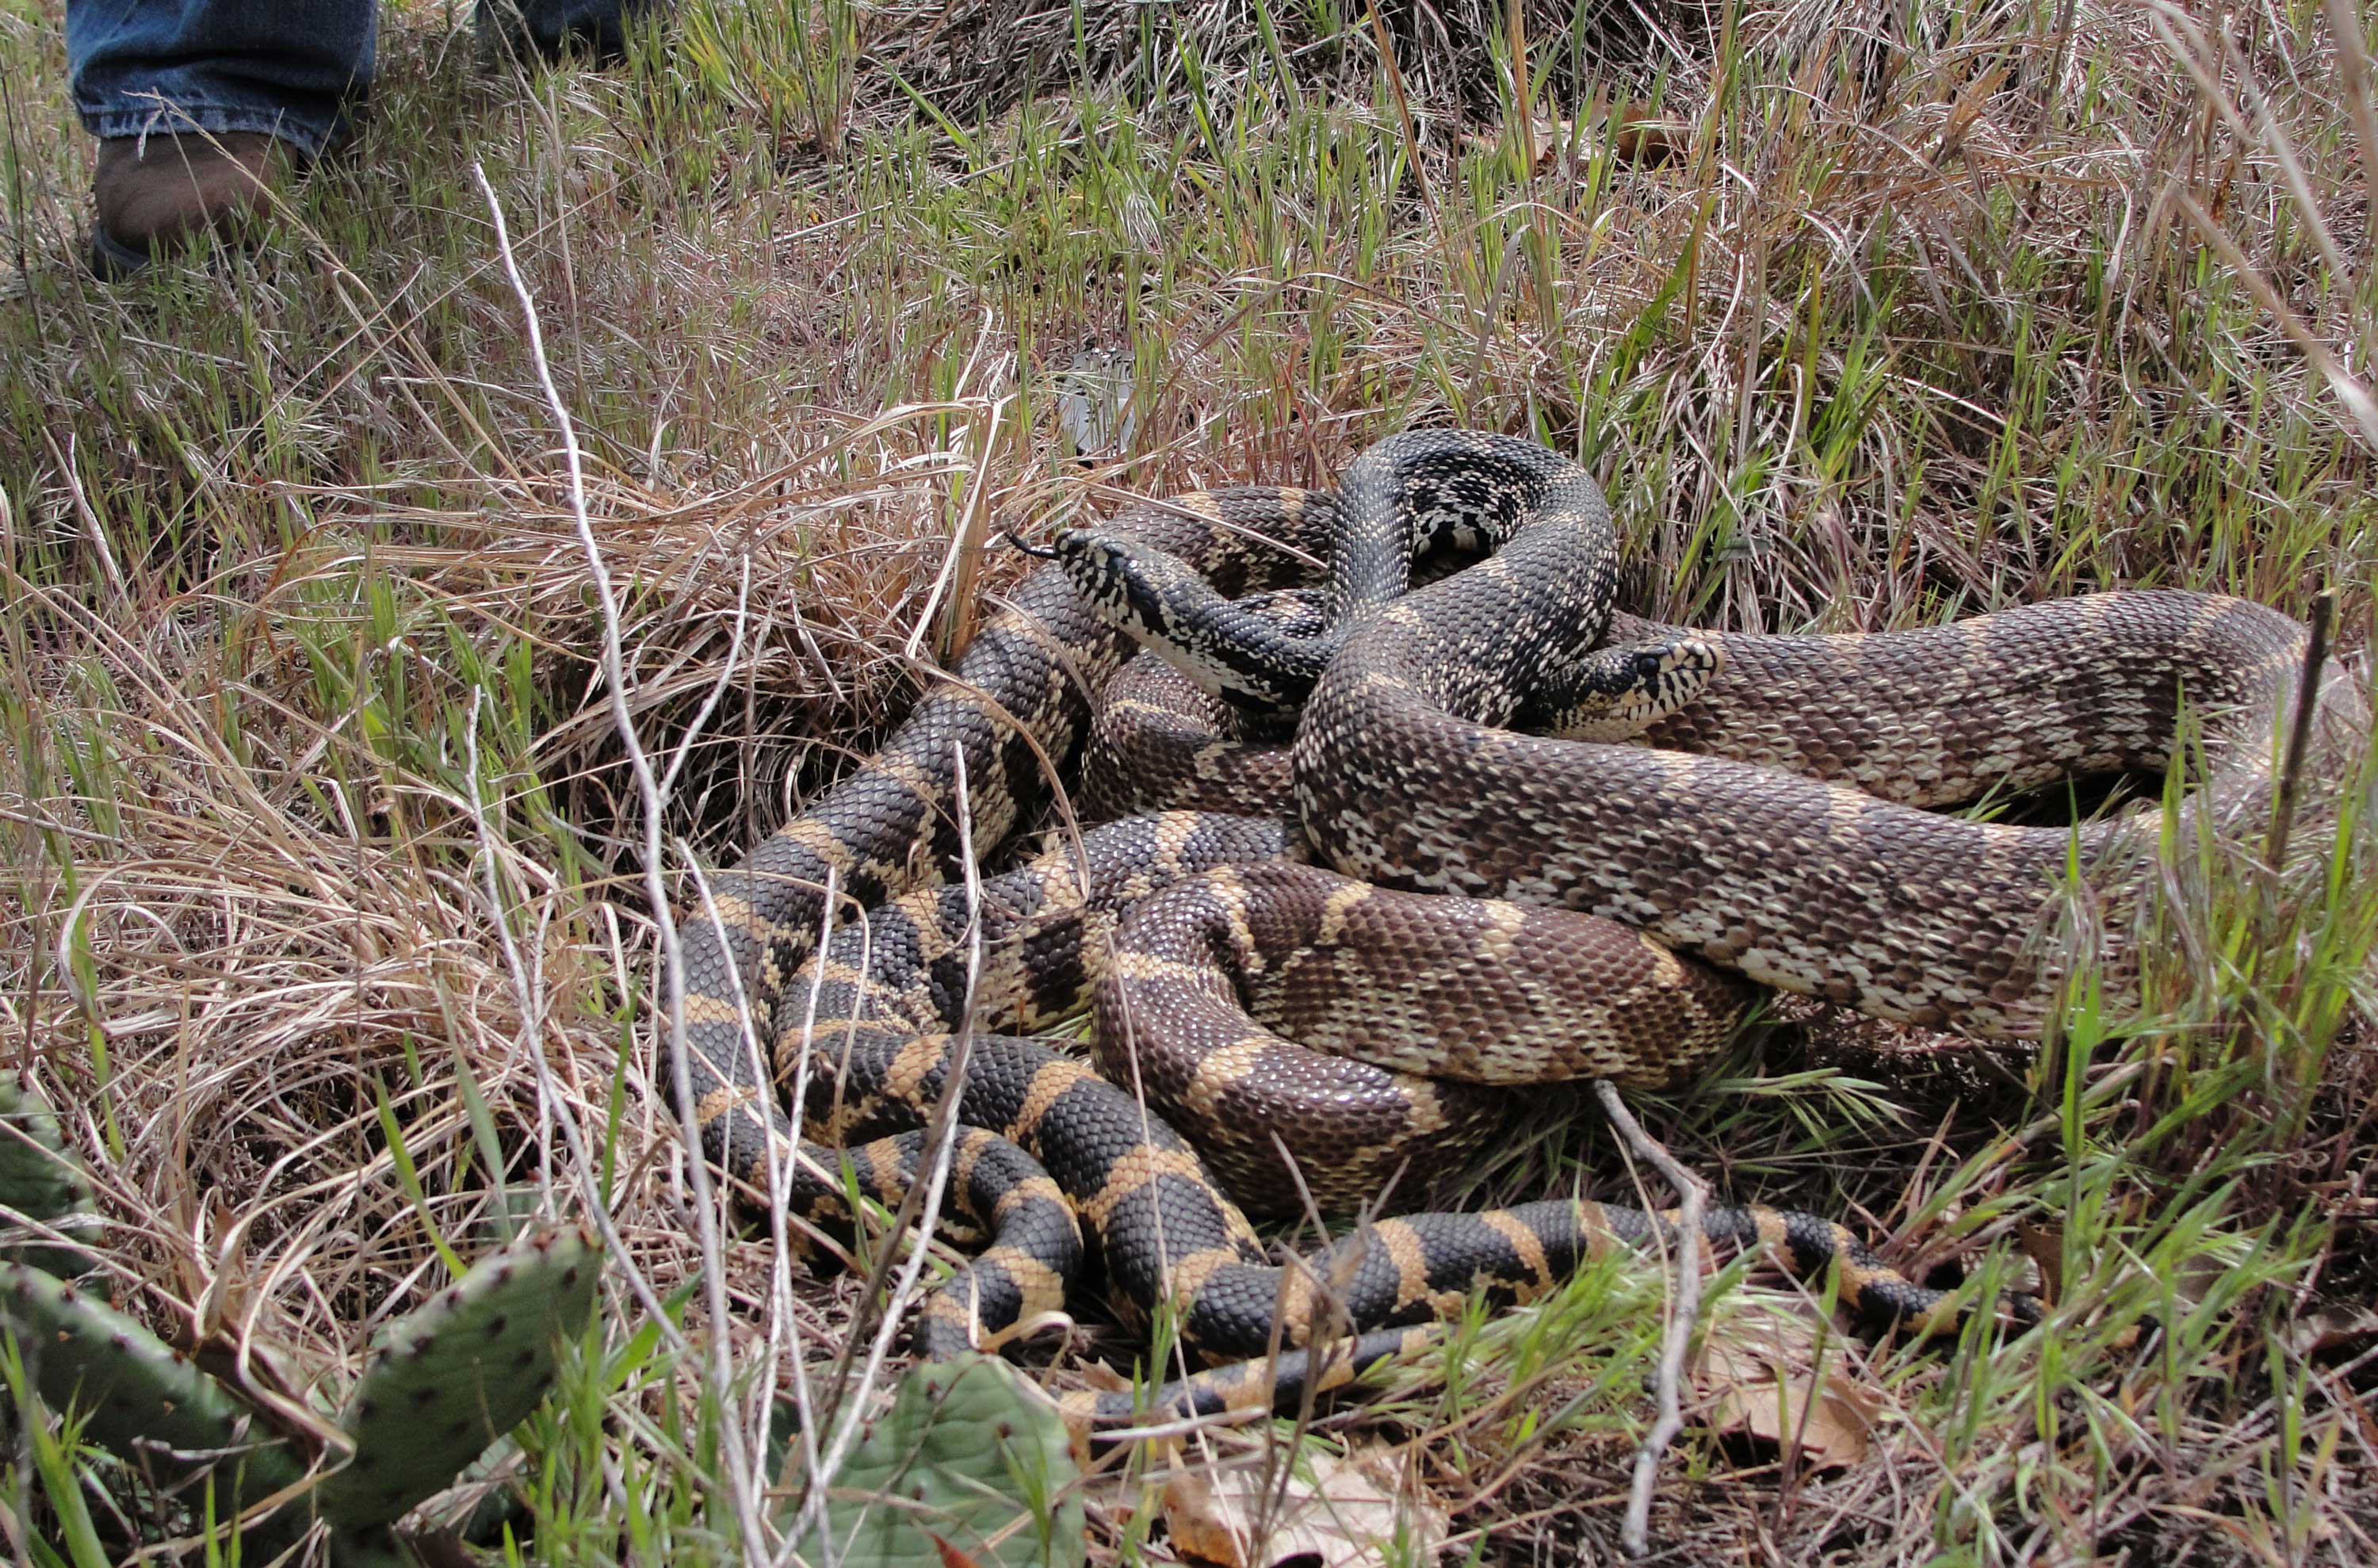 Two bullsnakes coiled up together in the grass at Braidwood Dunes.